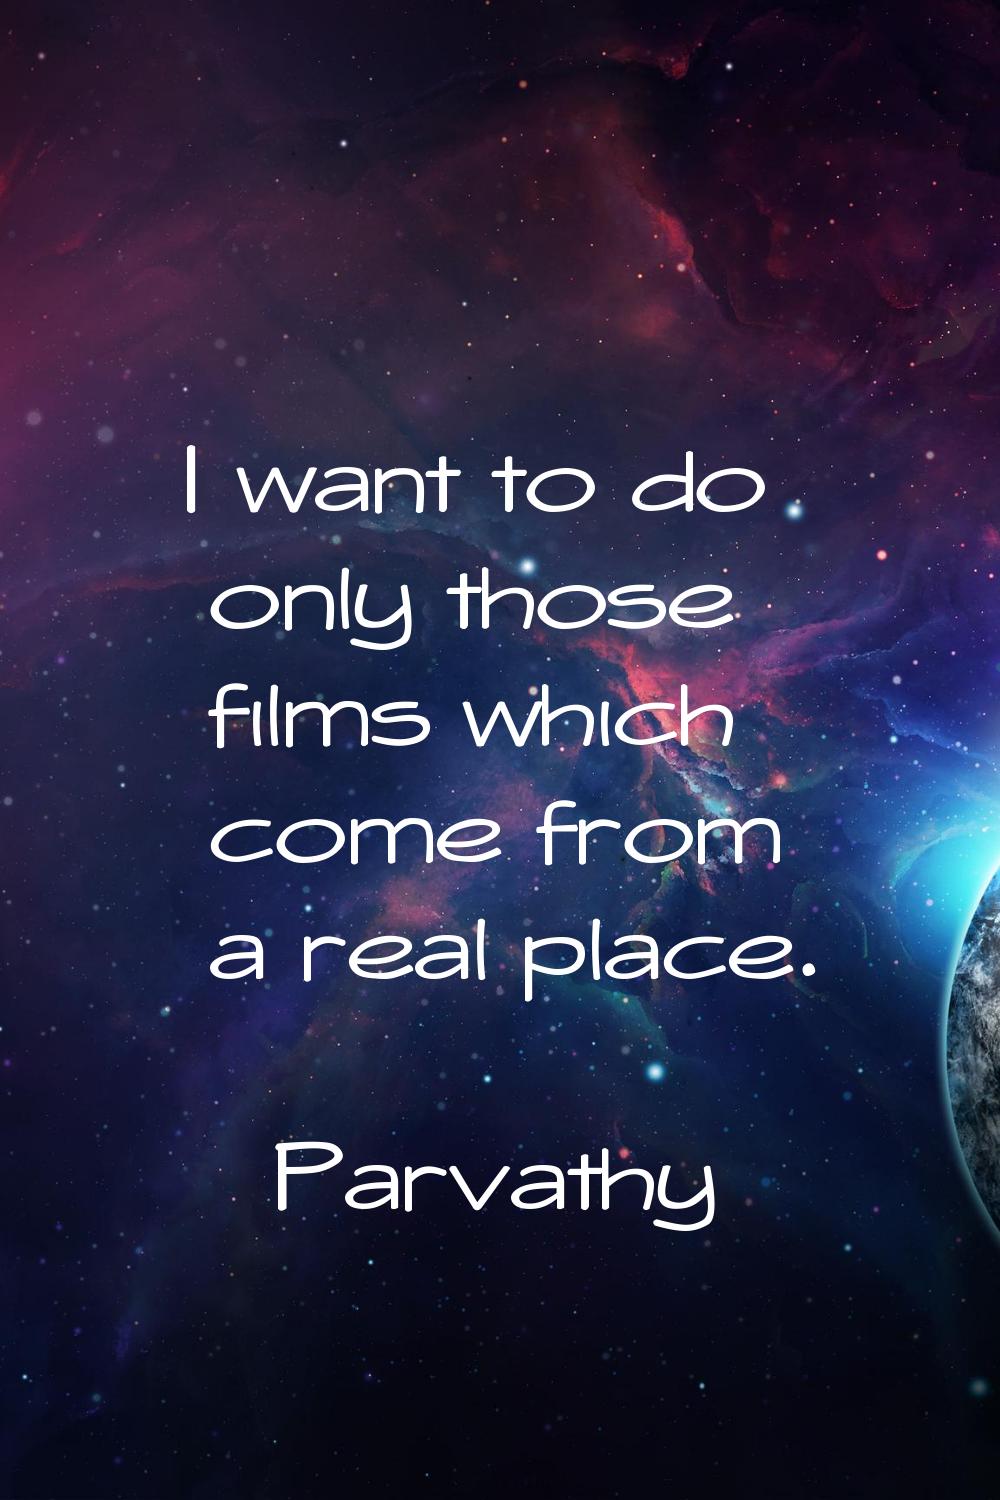 I want to do only those films which come from a real place.